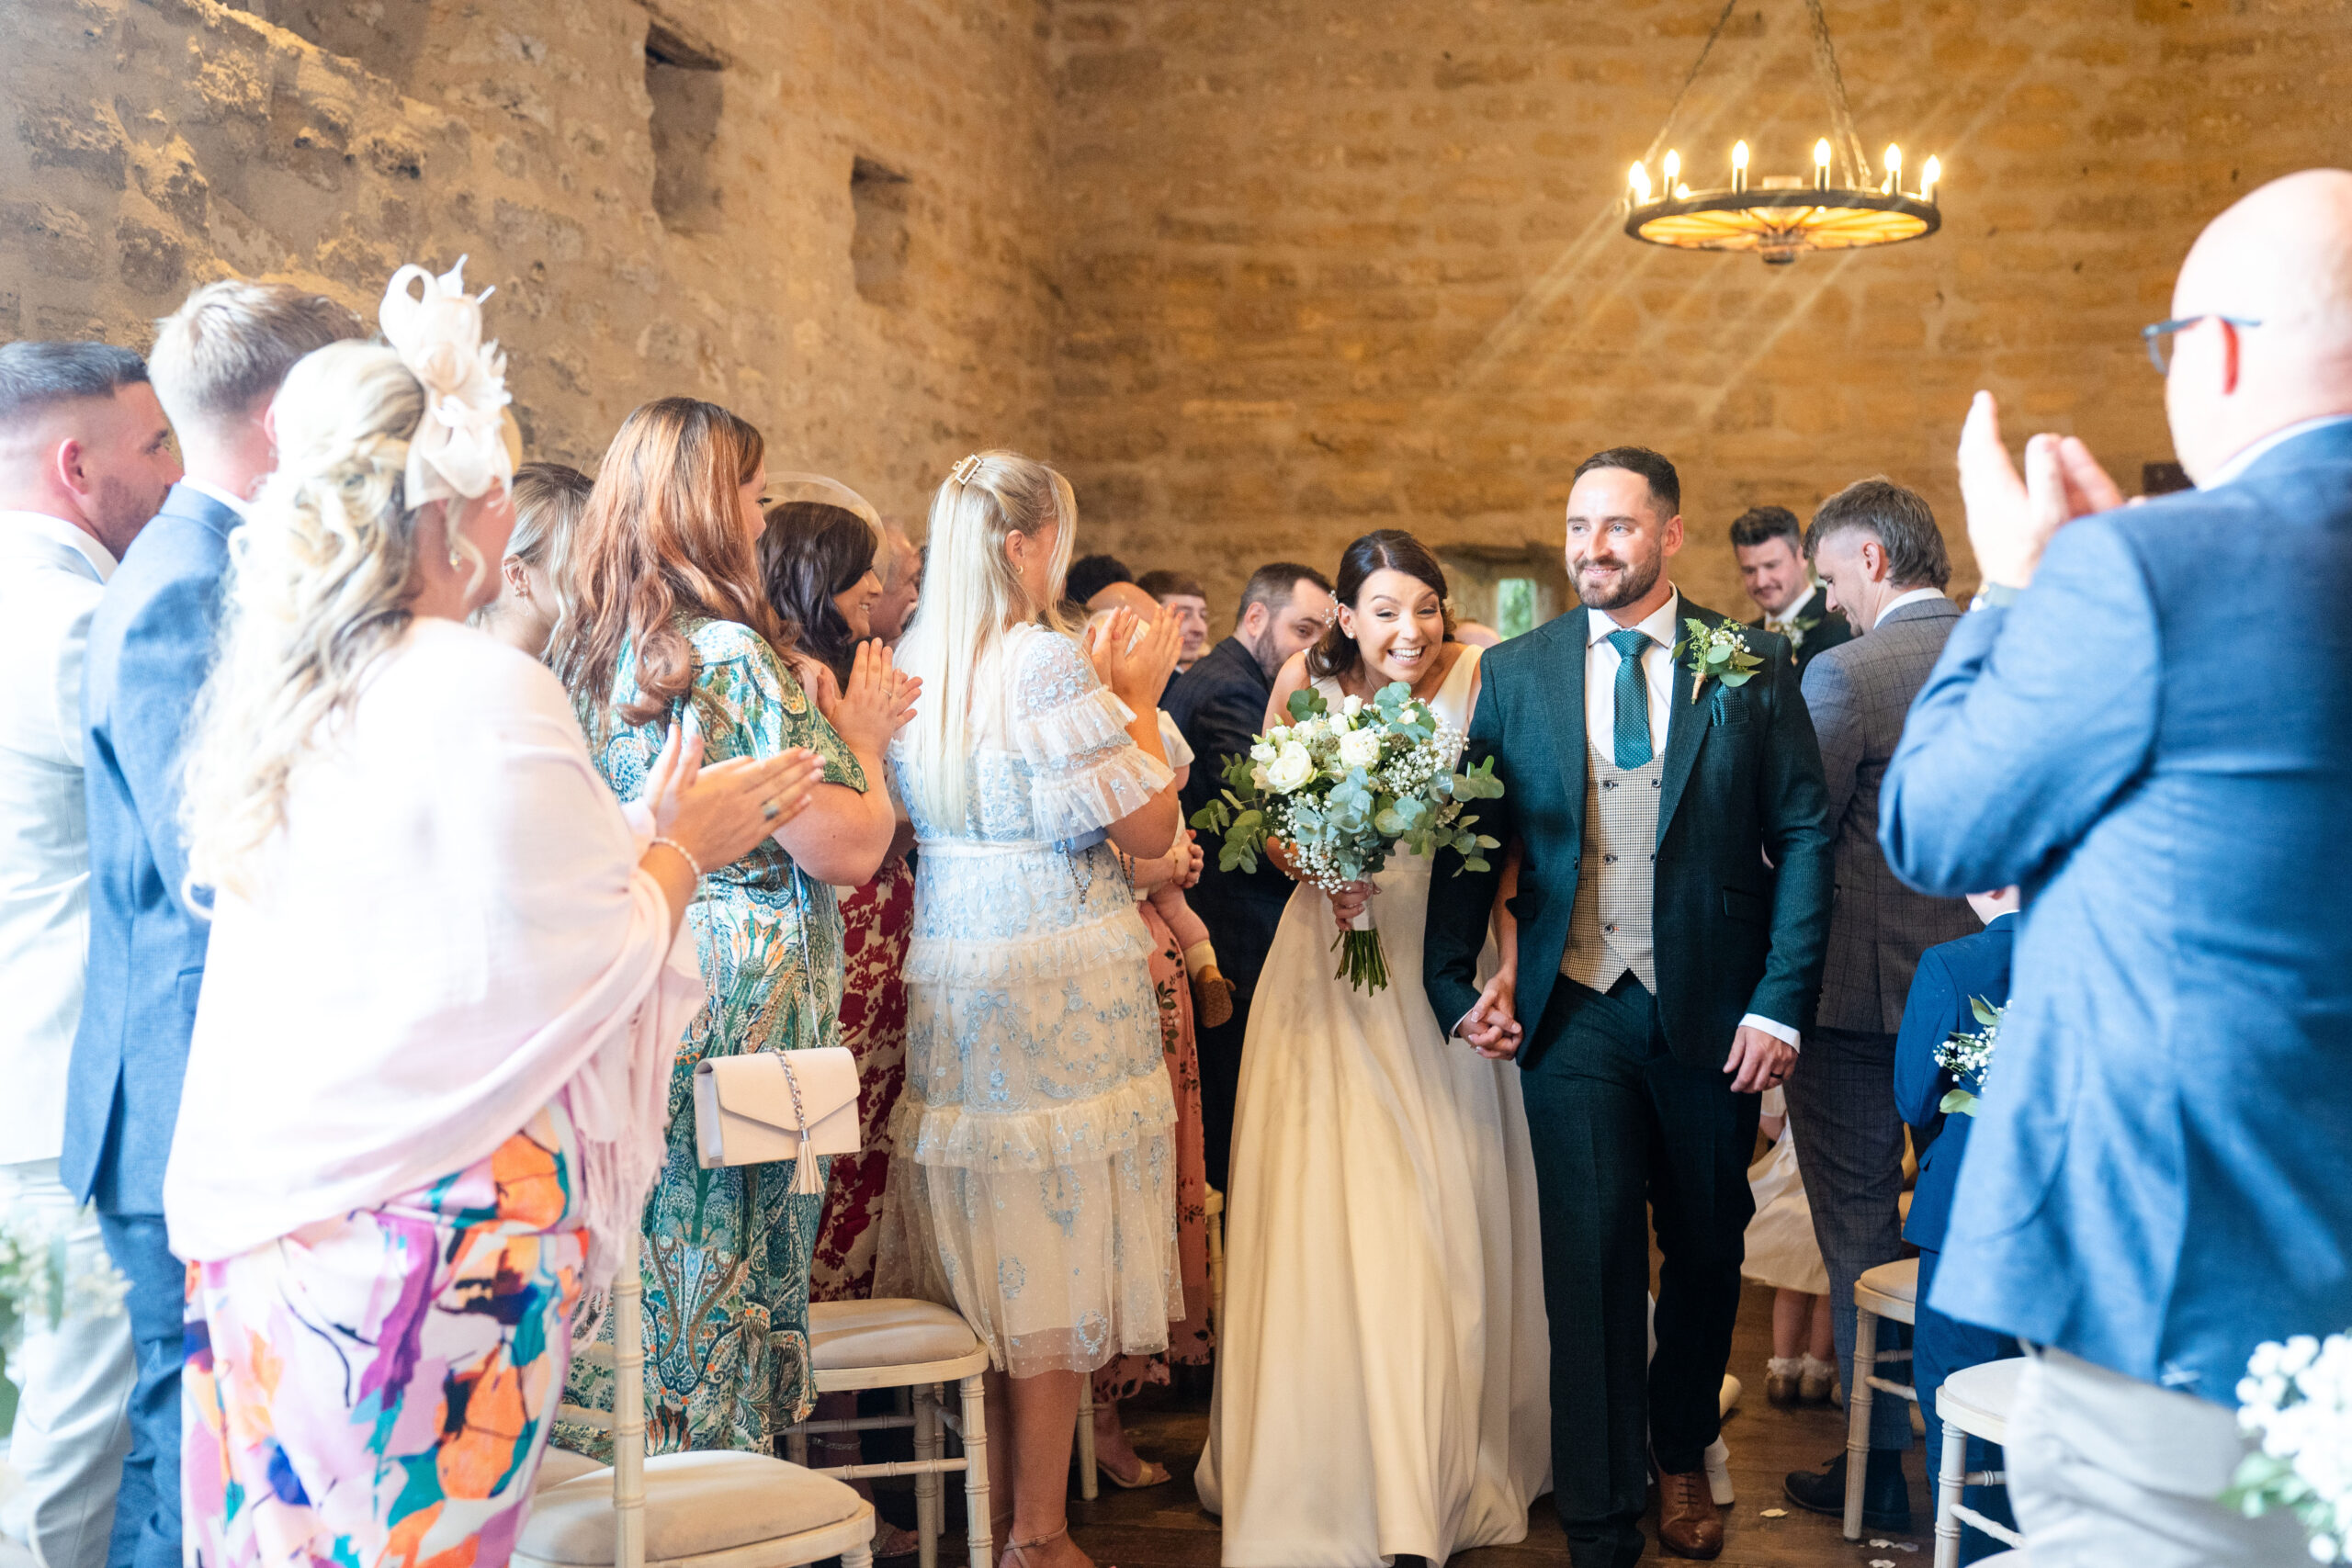 Tithe barn wedding ceremony in South Yorkshire 